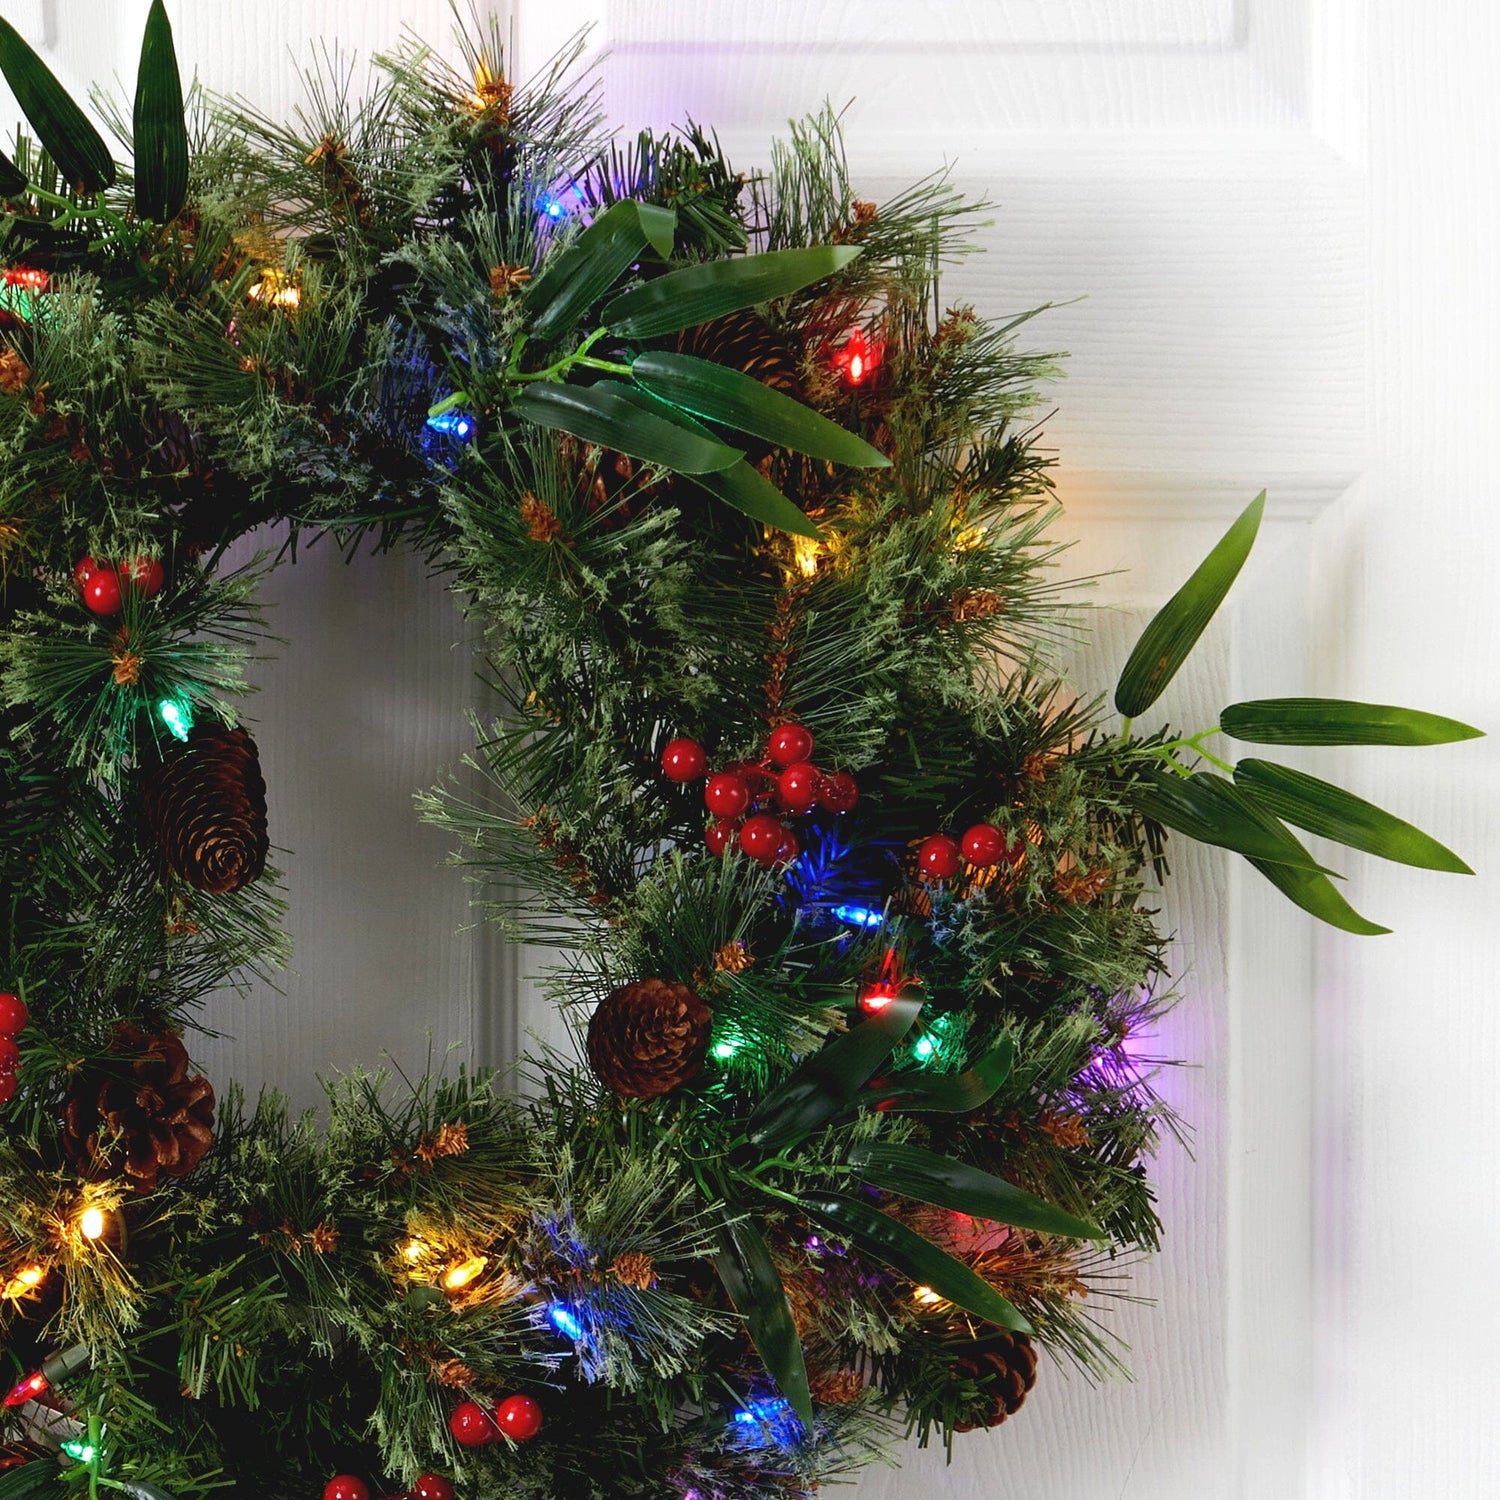 24” Mixed Pine Artificial Christmas Wreath with 50 Multicolored LED Lights, Berries and Pine Cones